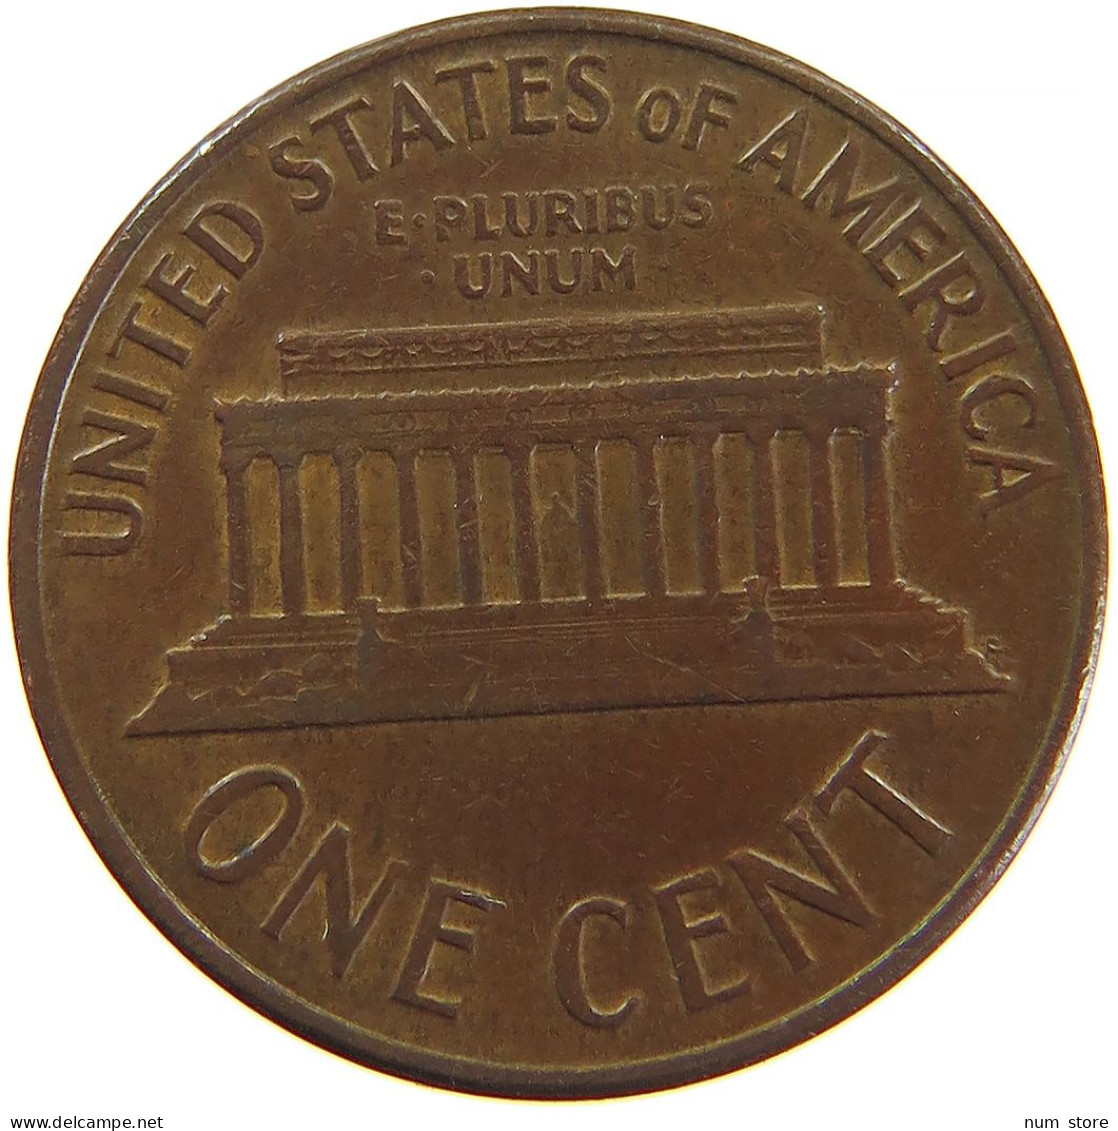 UNITED STATES OF AMERICA CENT 1960 D SMALL DATE LINCOLN MEMORIAL #t024 0151 - 1959-…: Lincoln, Memorial Reverse